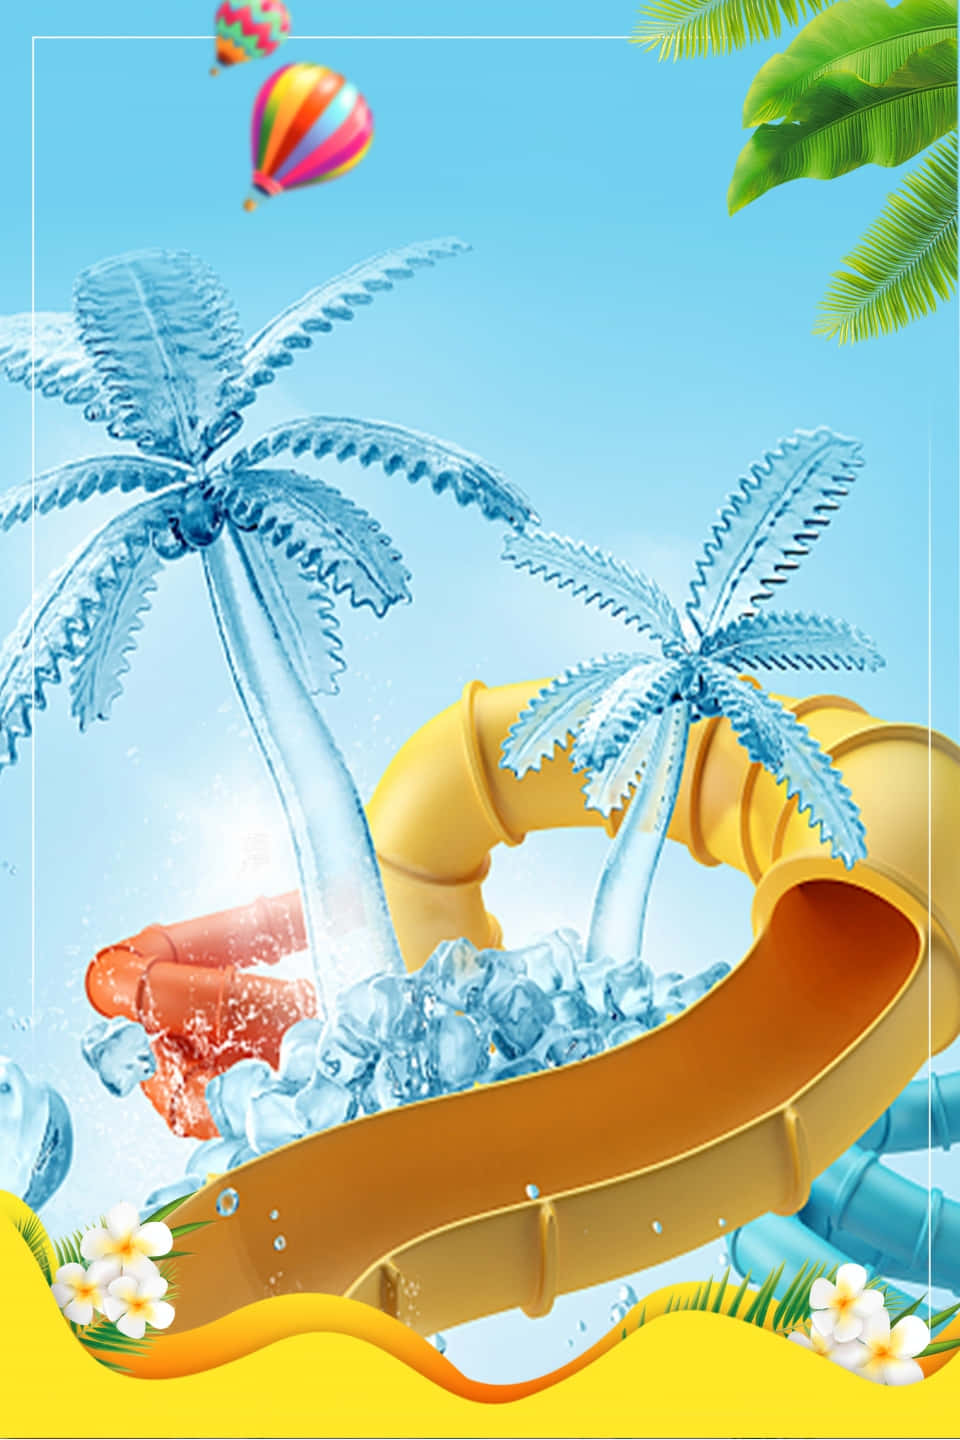 Water Slide Pool Party Background